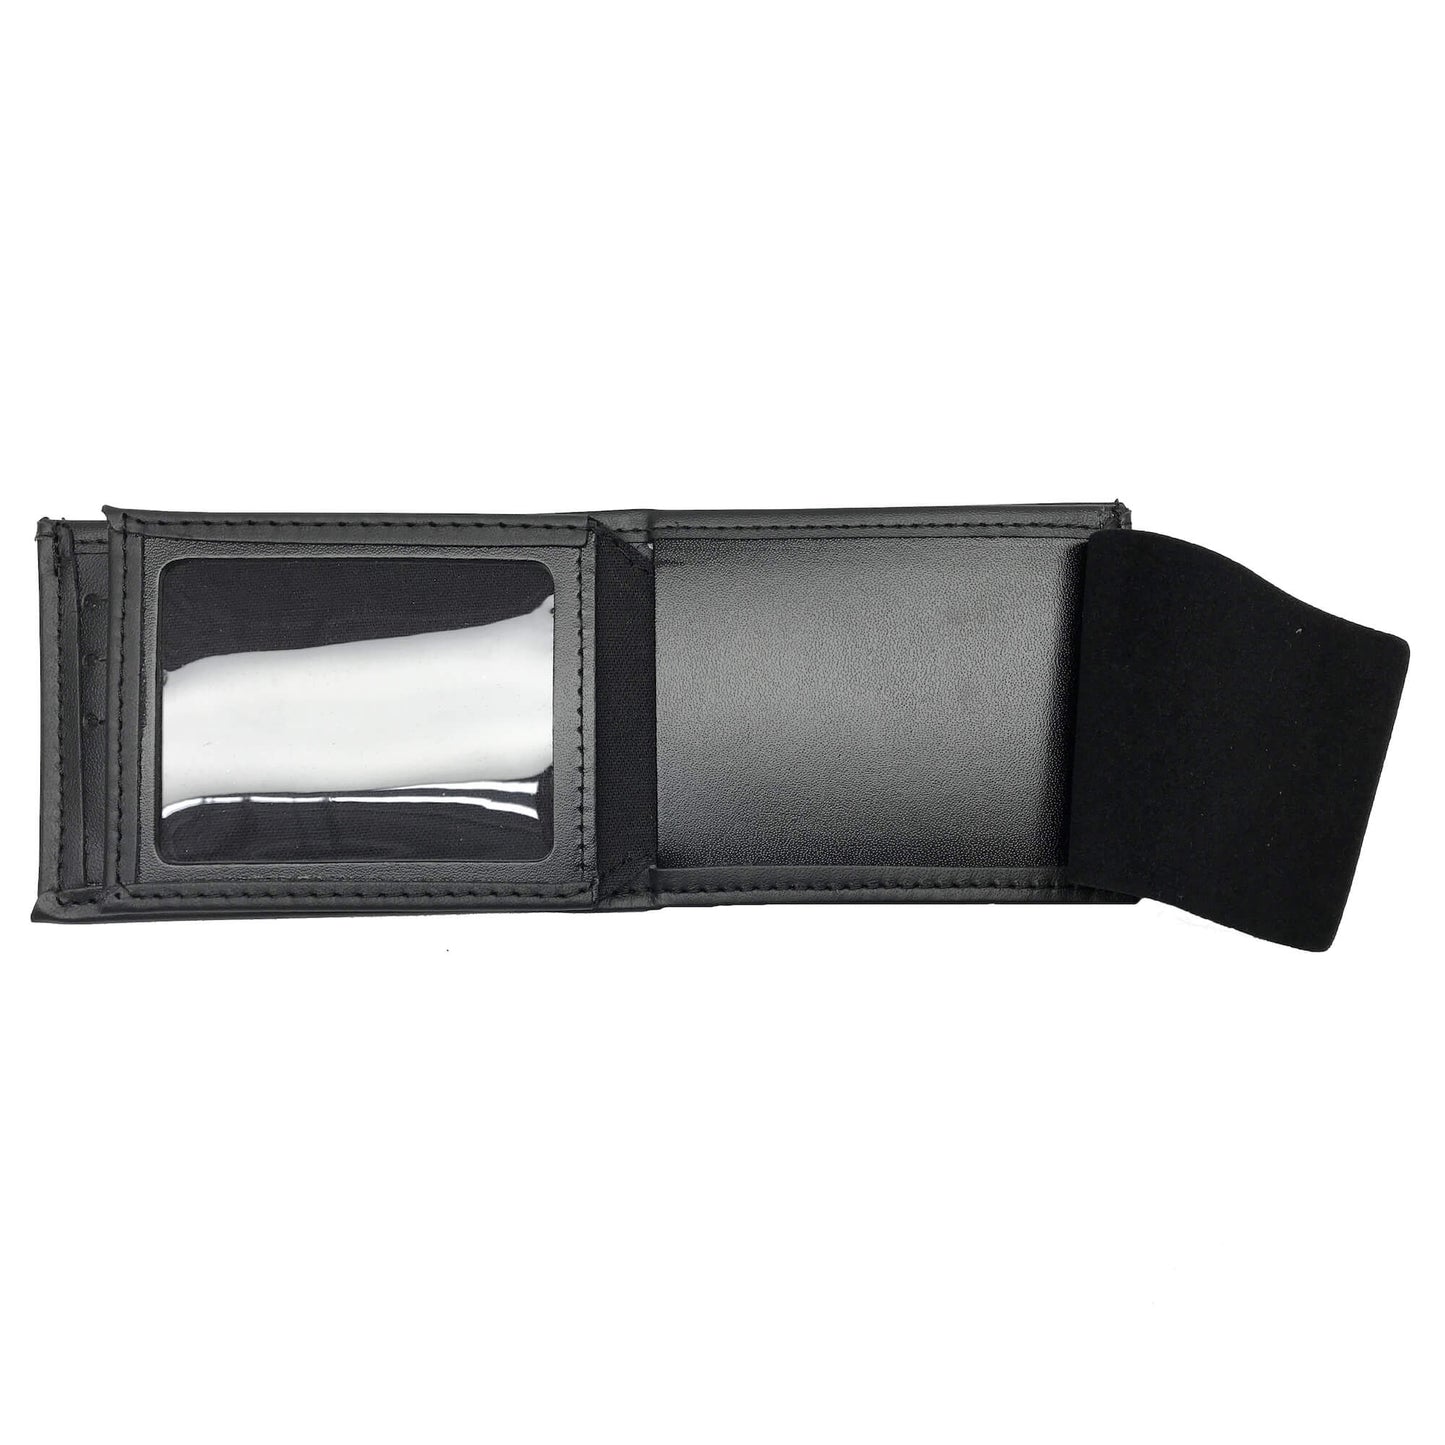 Florida Department of Corrections (DOC) Horizontal Bifold Hidden LARGE Badge Wallet-Perfect Fit-911 Duty Gear USA